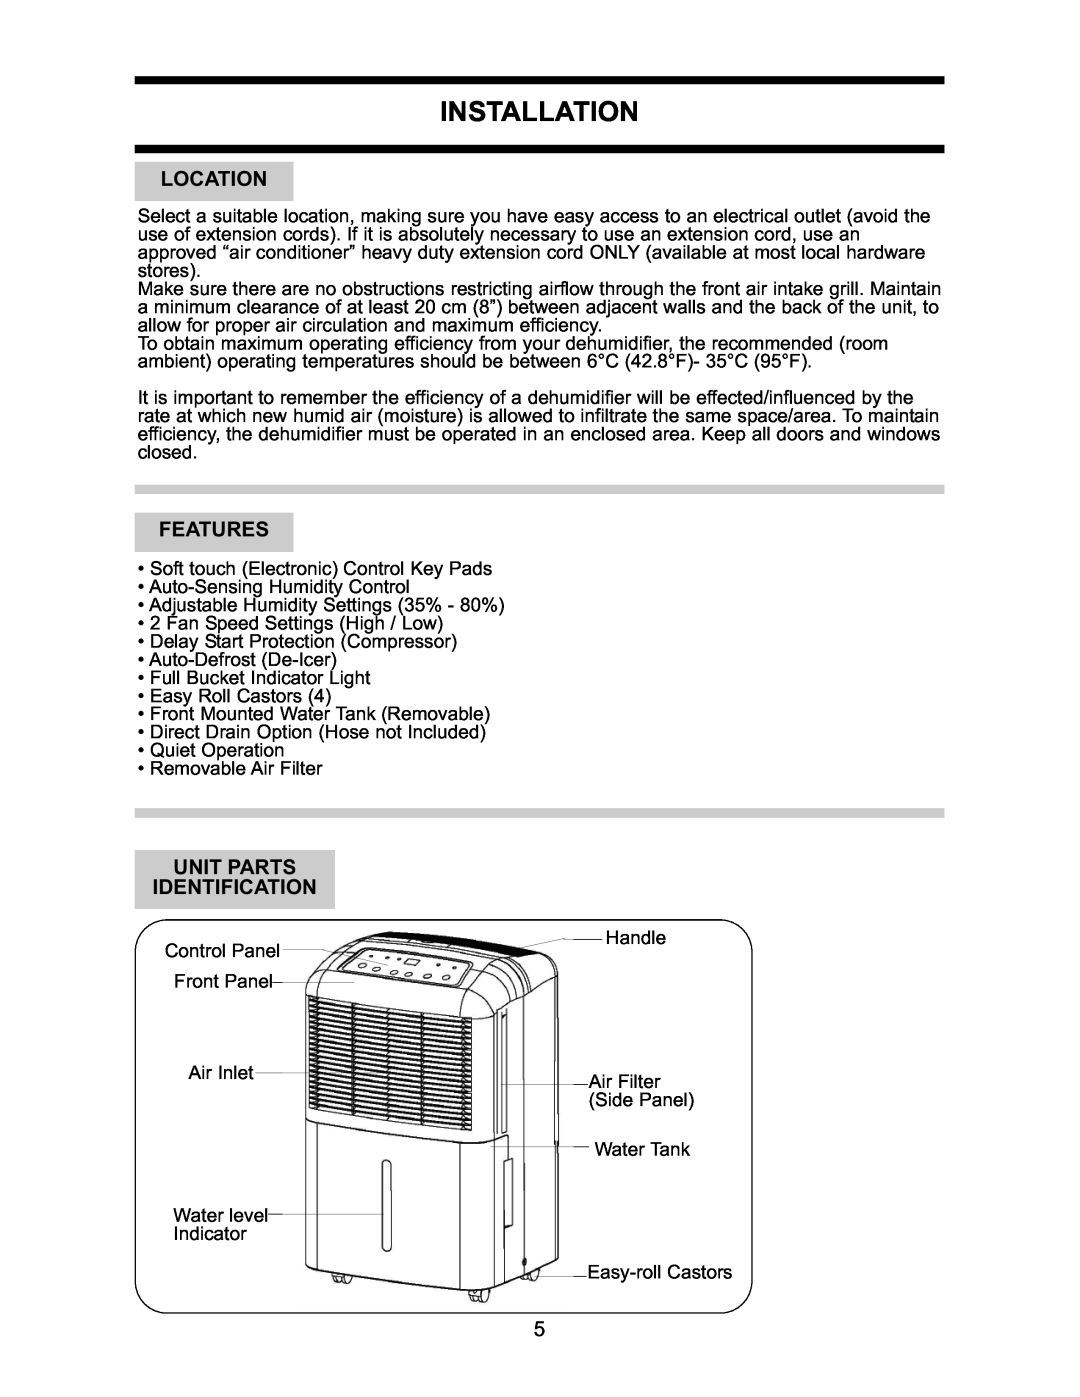 Danby DDR2509EE manual Installation, Location, Features, Unit Parts Identification 